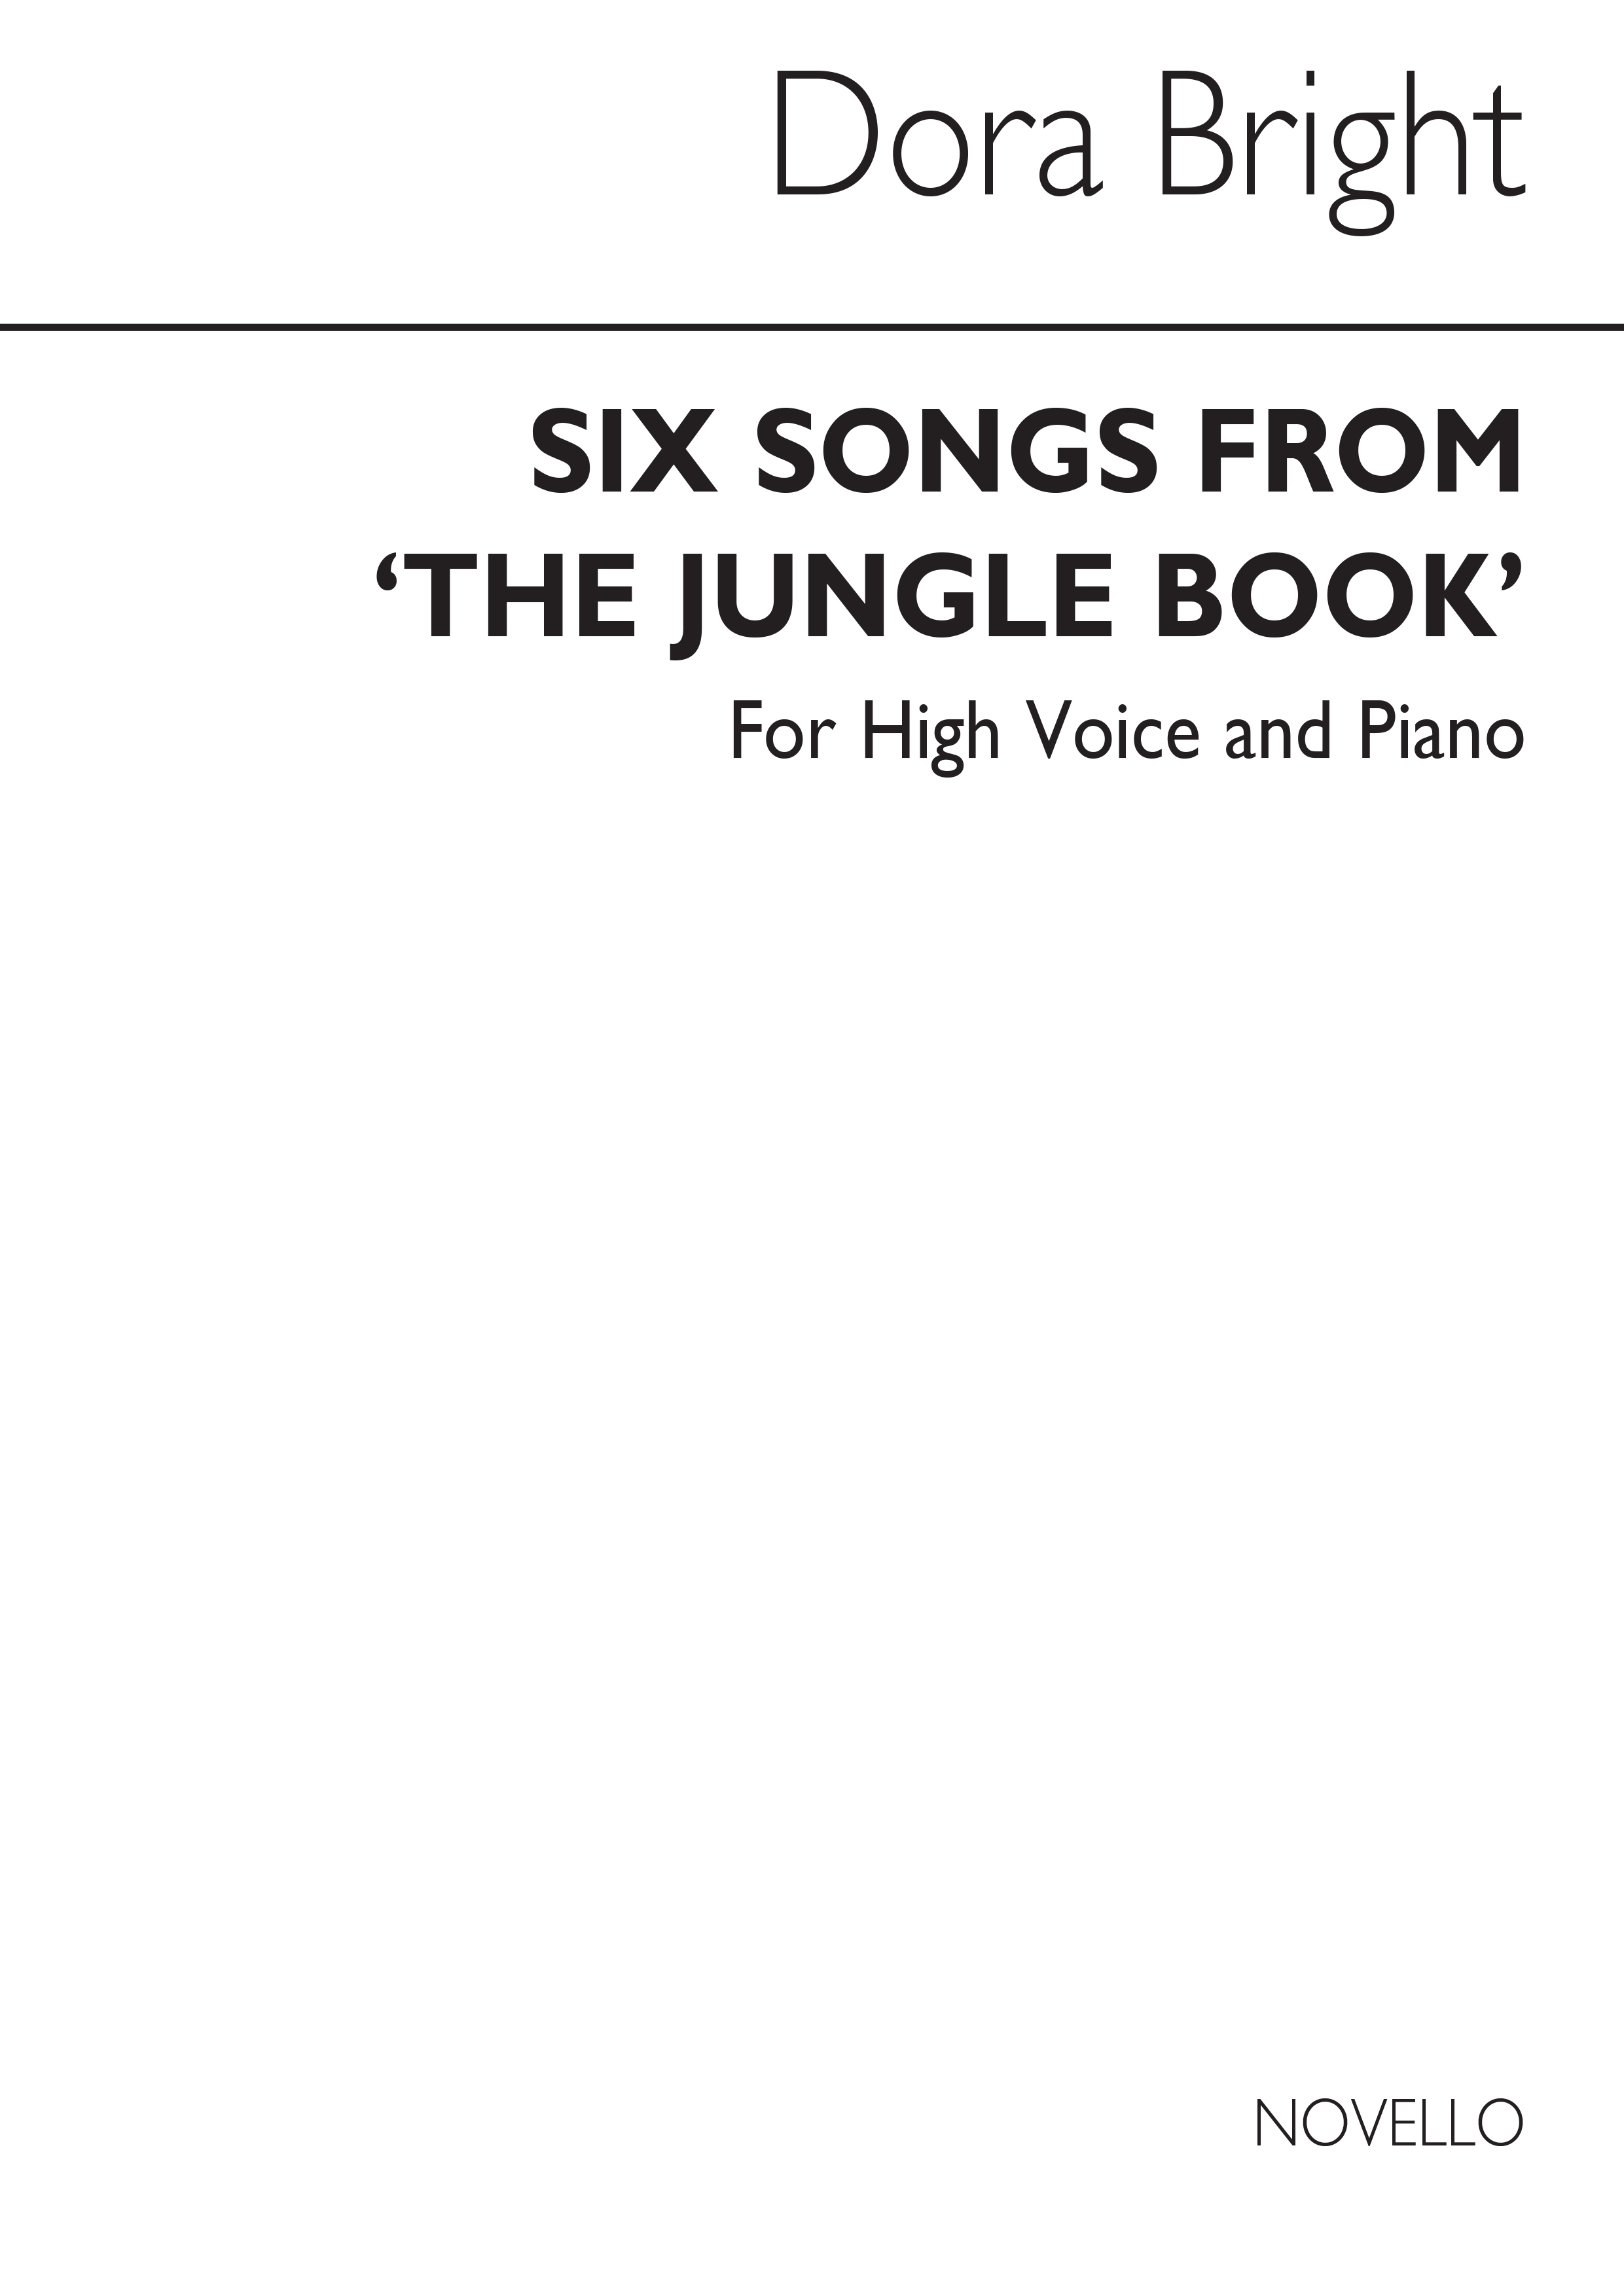 Bright, D Jungle Book Six Songs High Voice And Piano